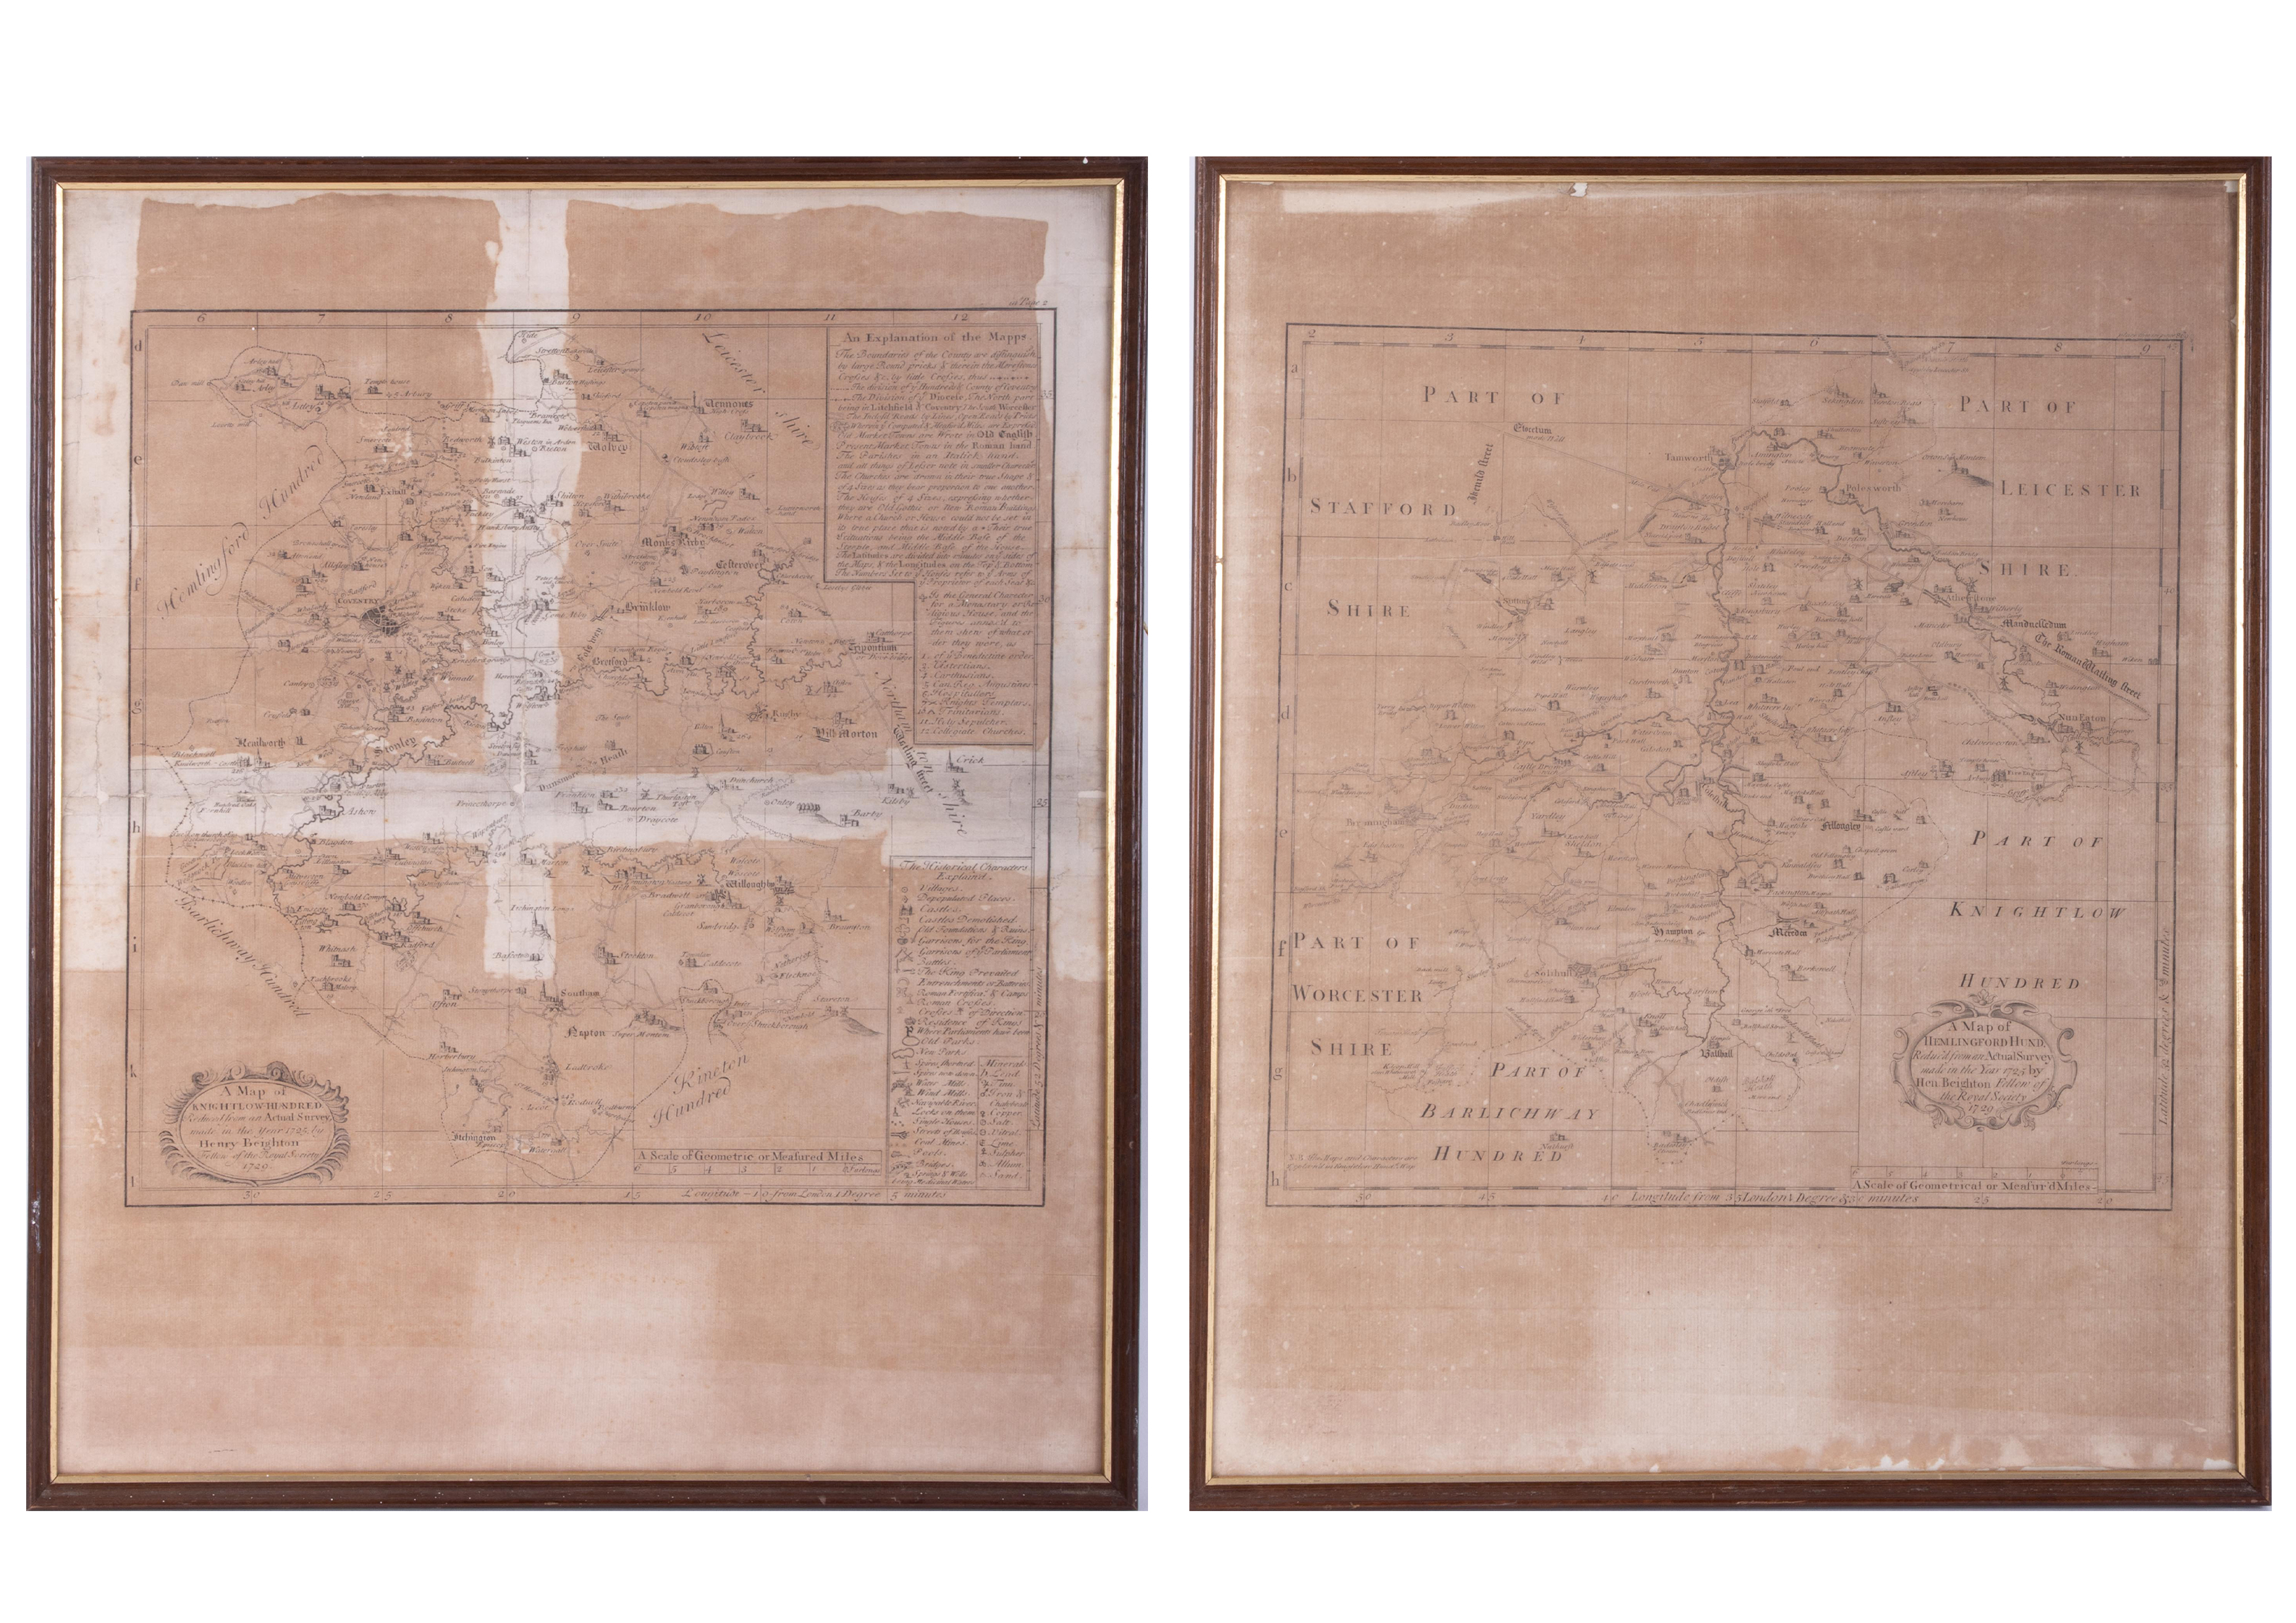 Henry Beighton, an 18th century map of Hemlingford Hundred, 1729, together with a map of Knightlow